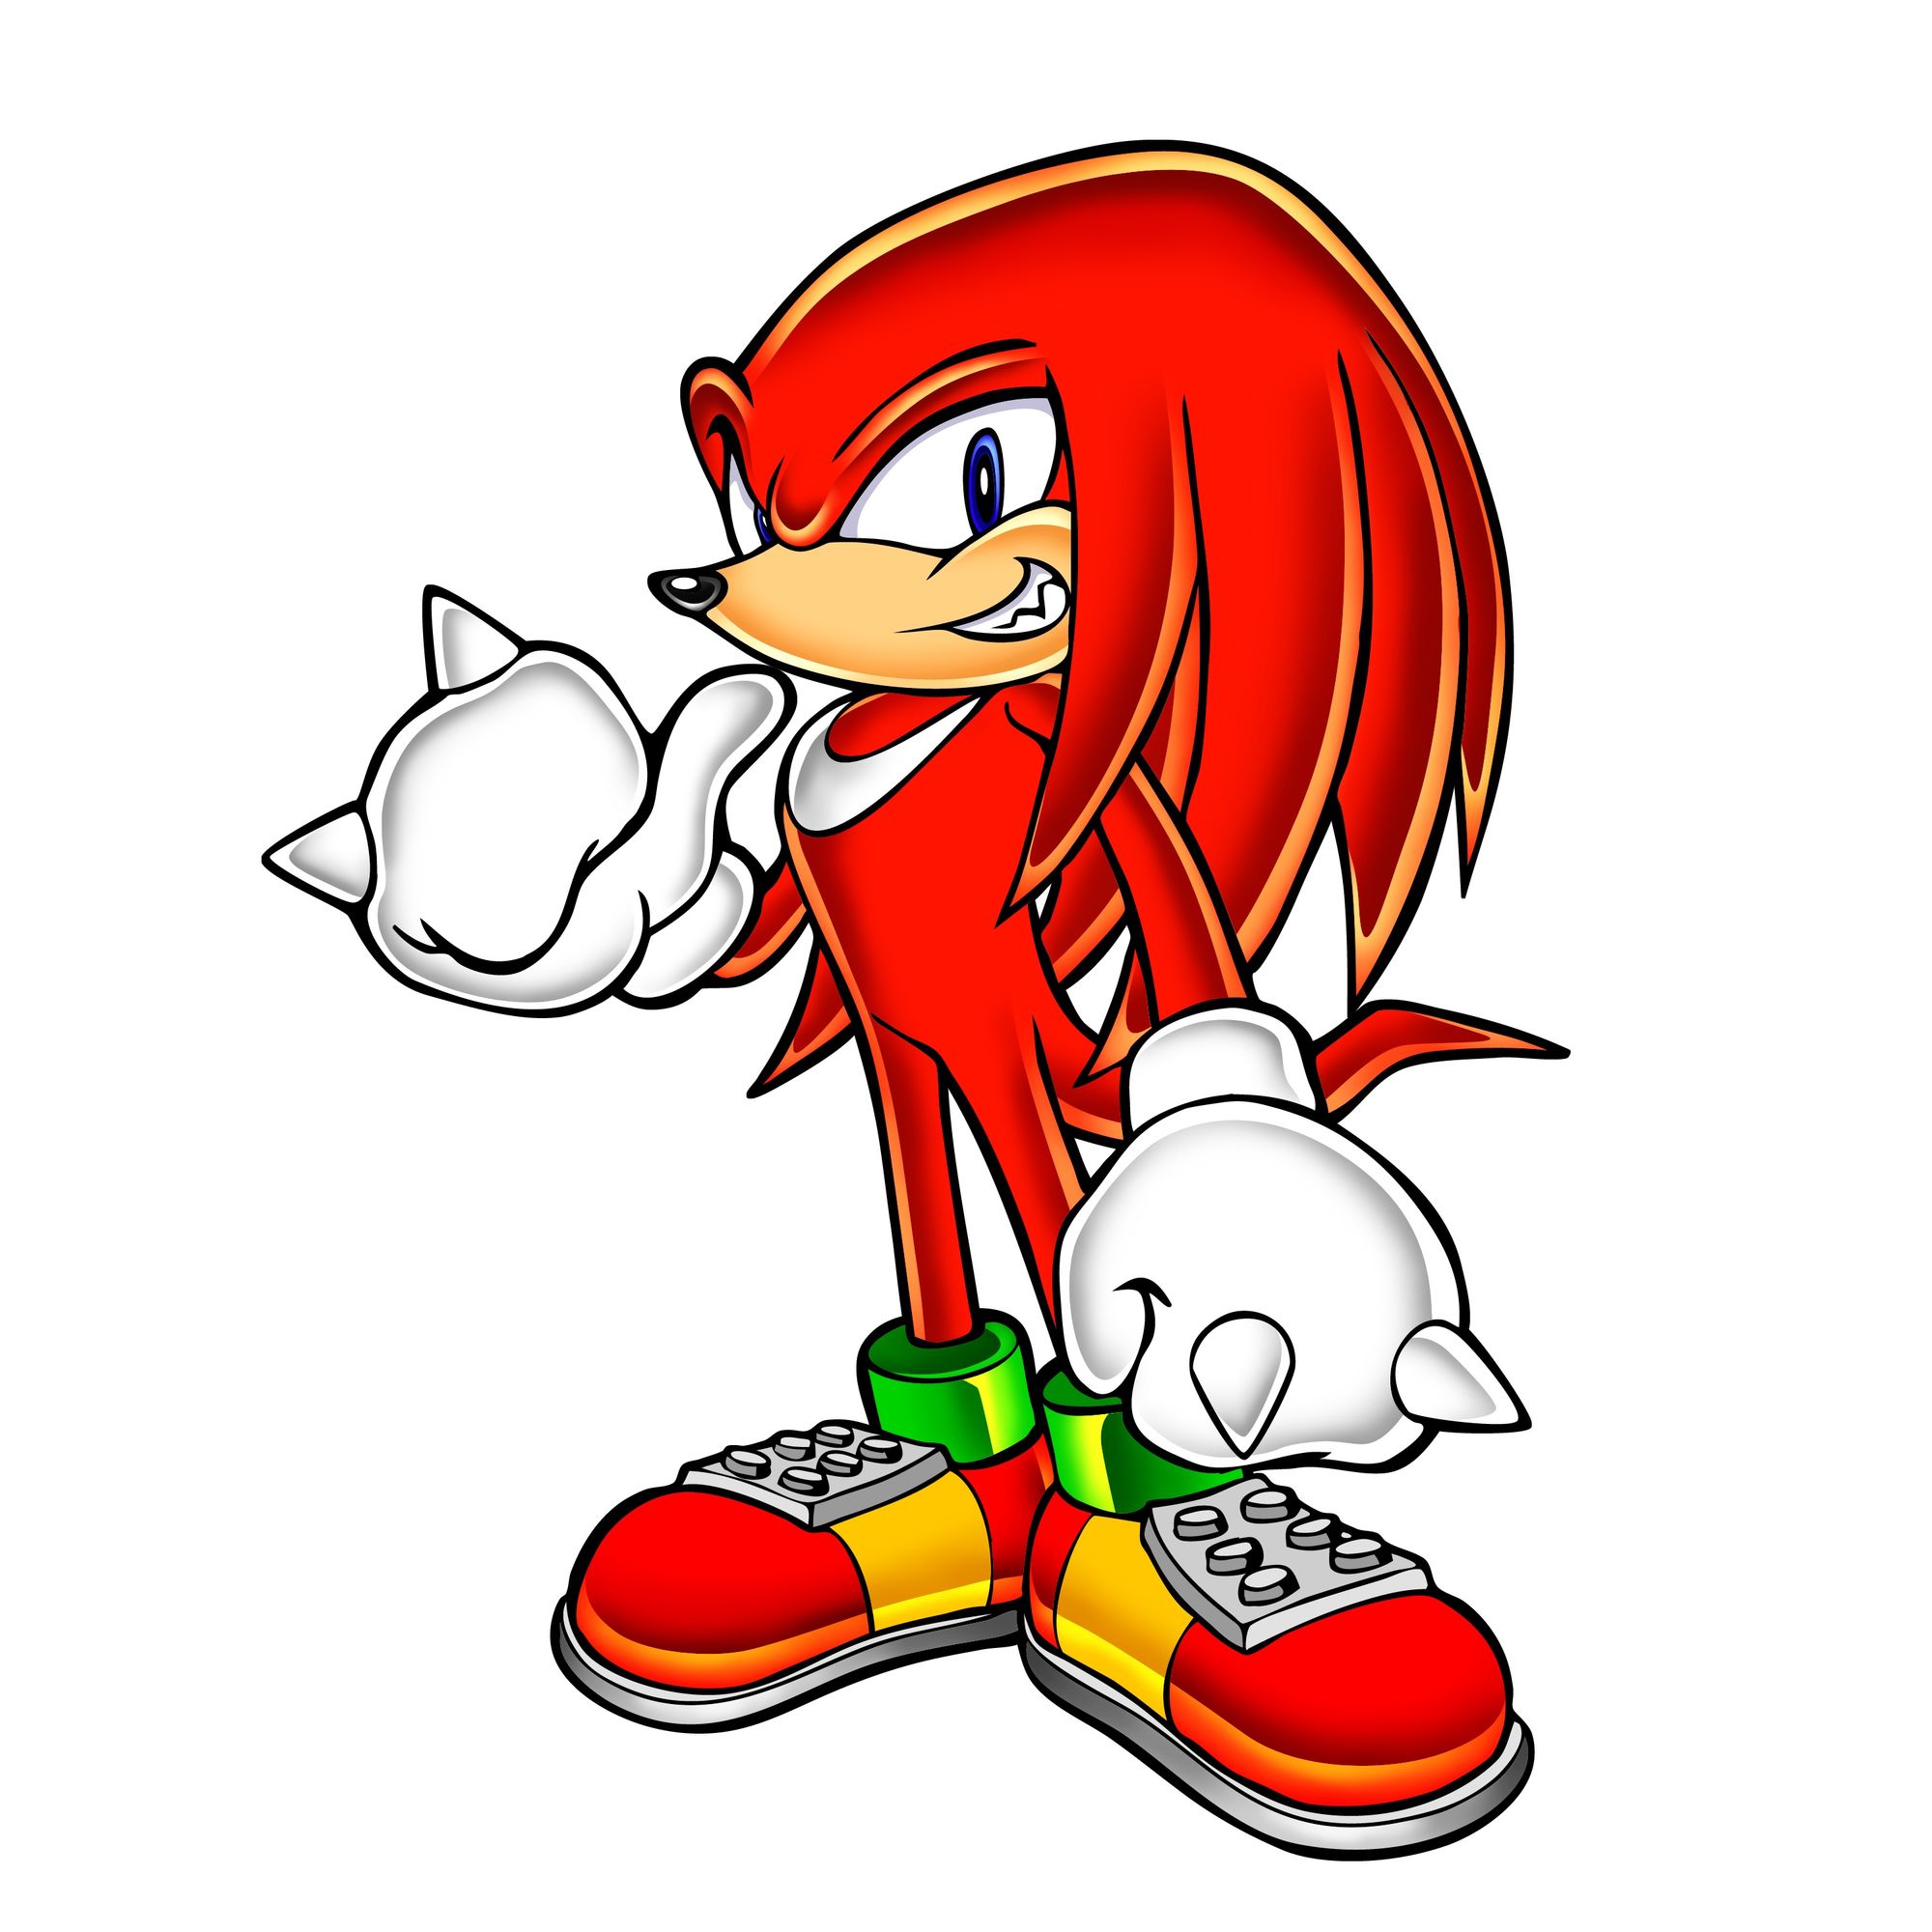 Knuckles the Echidna | Heroes Wiki | Fandom powered by Wikia